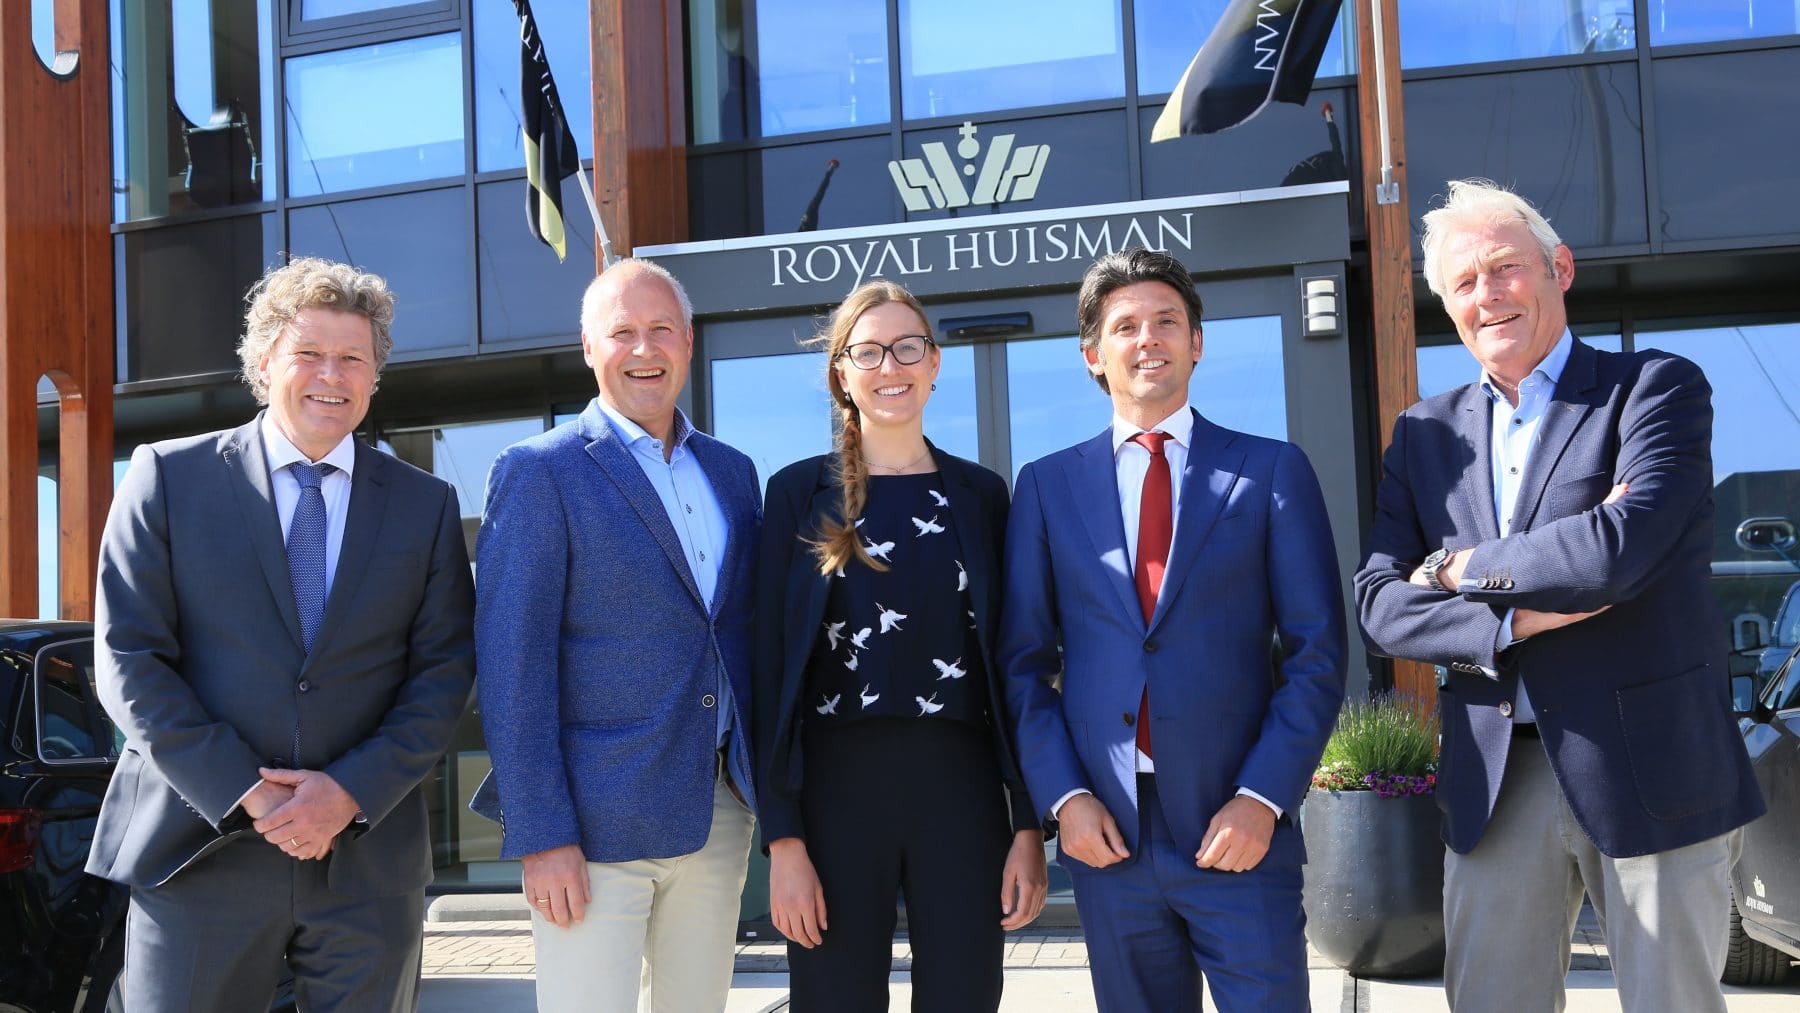 AMSTERDAM PORT AREA TO BE GRACED WITH NEW 'ROYAL' PRESENCE - Royal